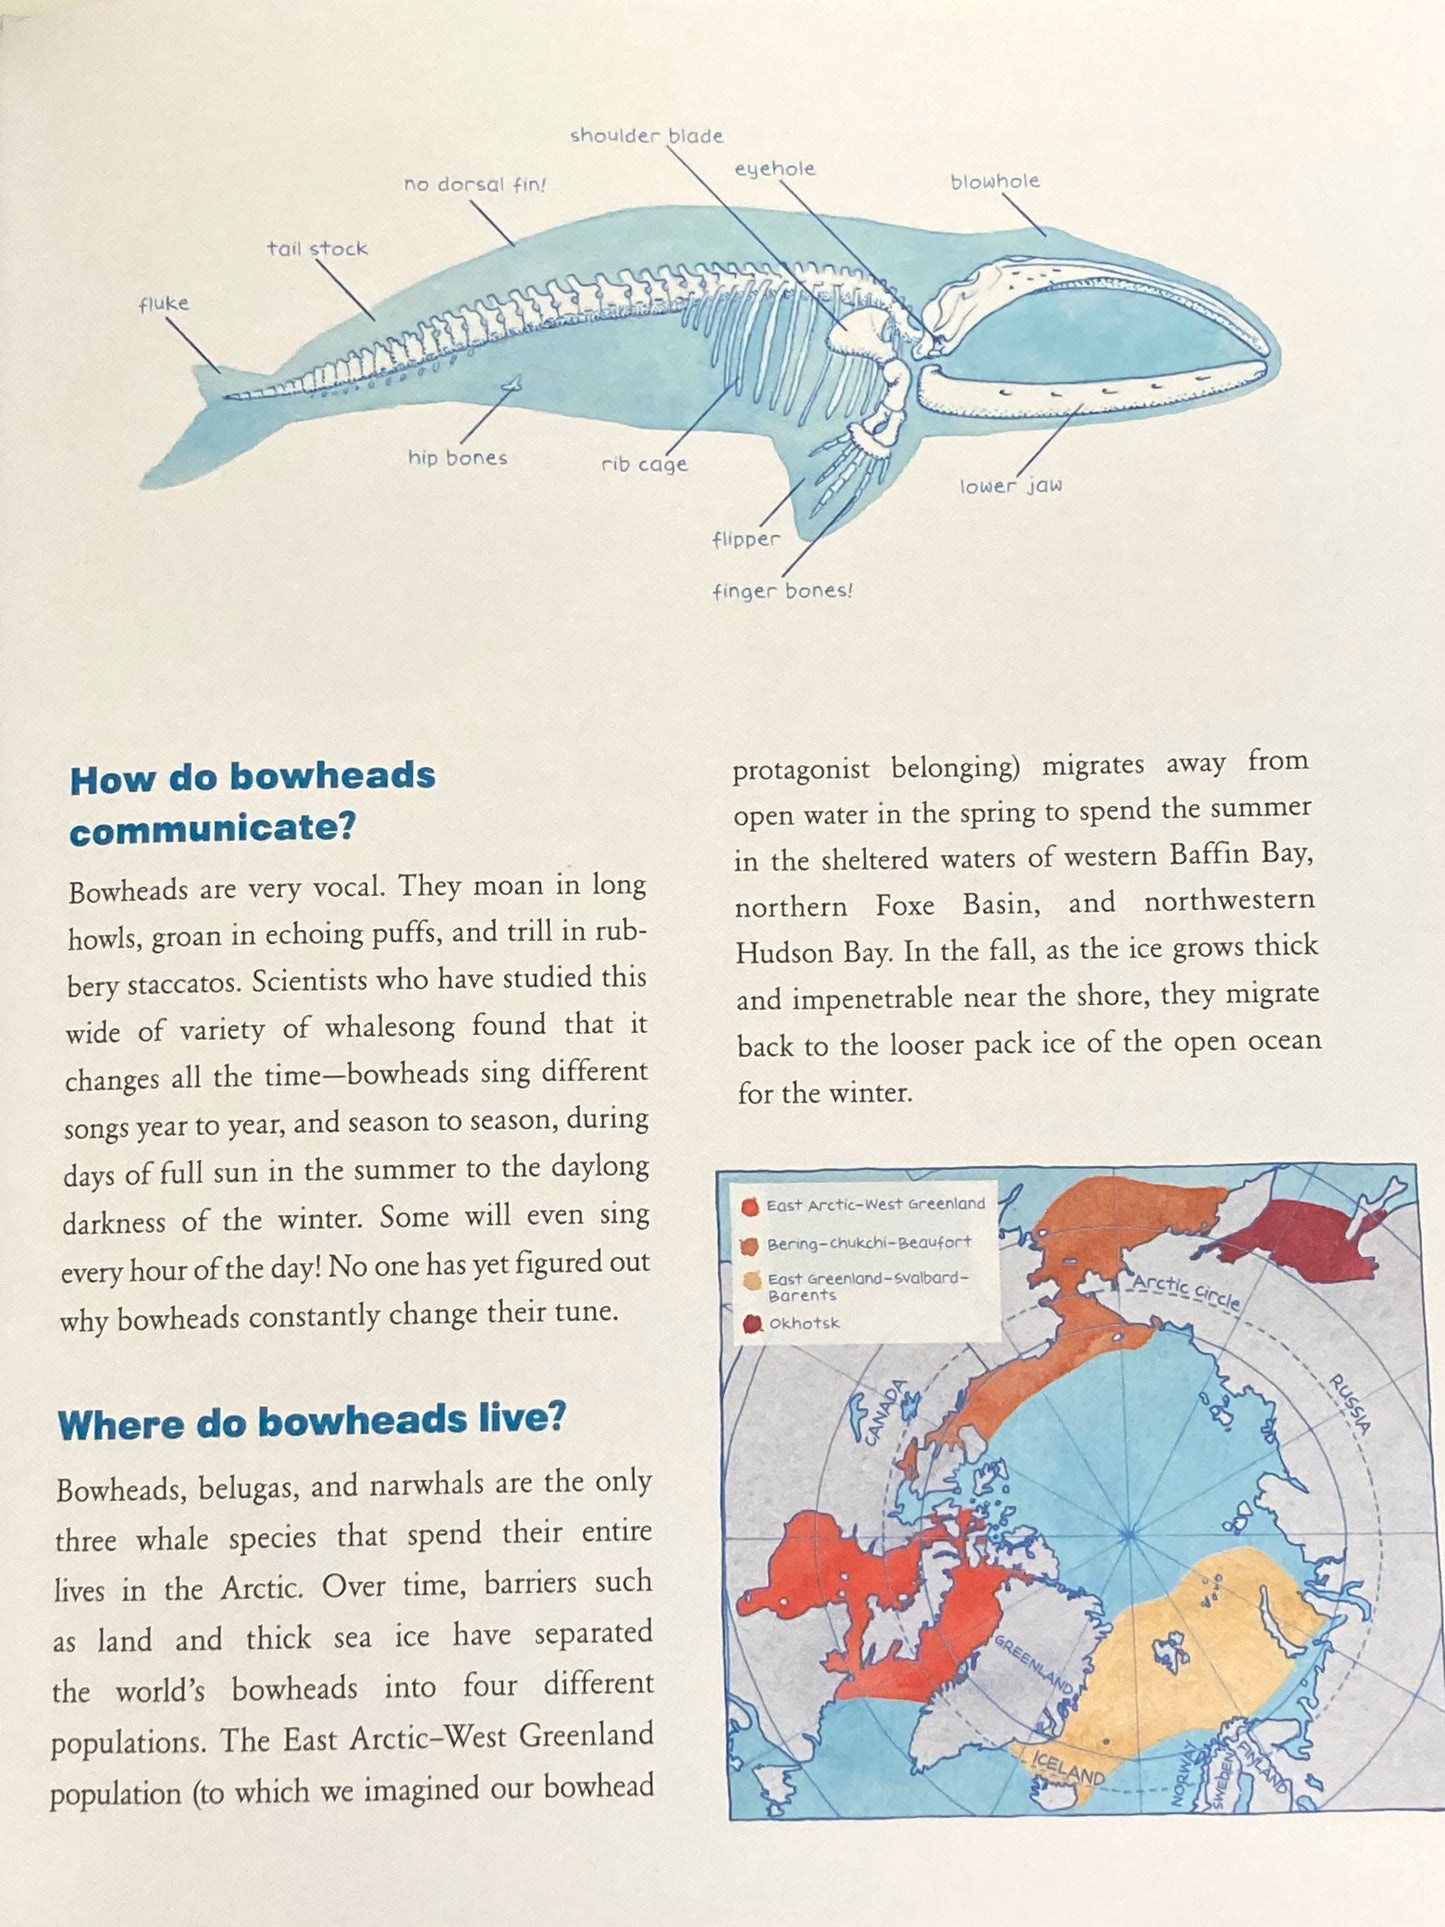 Educational Children's Picture Book - THE WHALE WHO SWAM THROUGH TIME